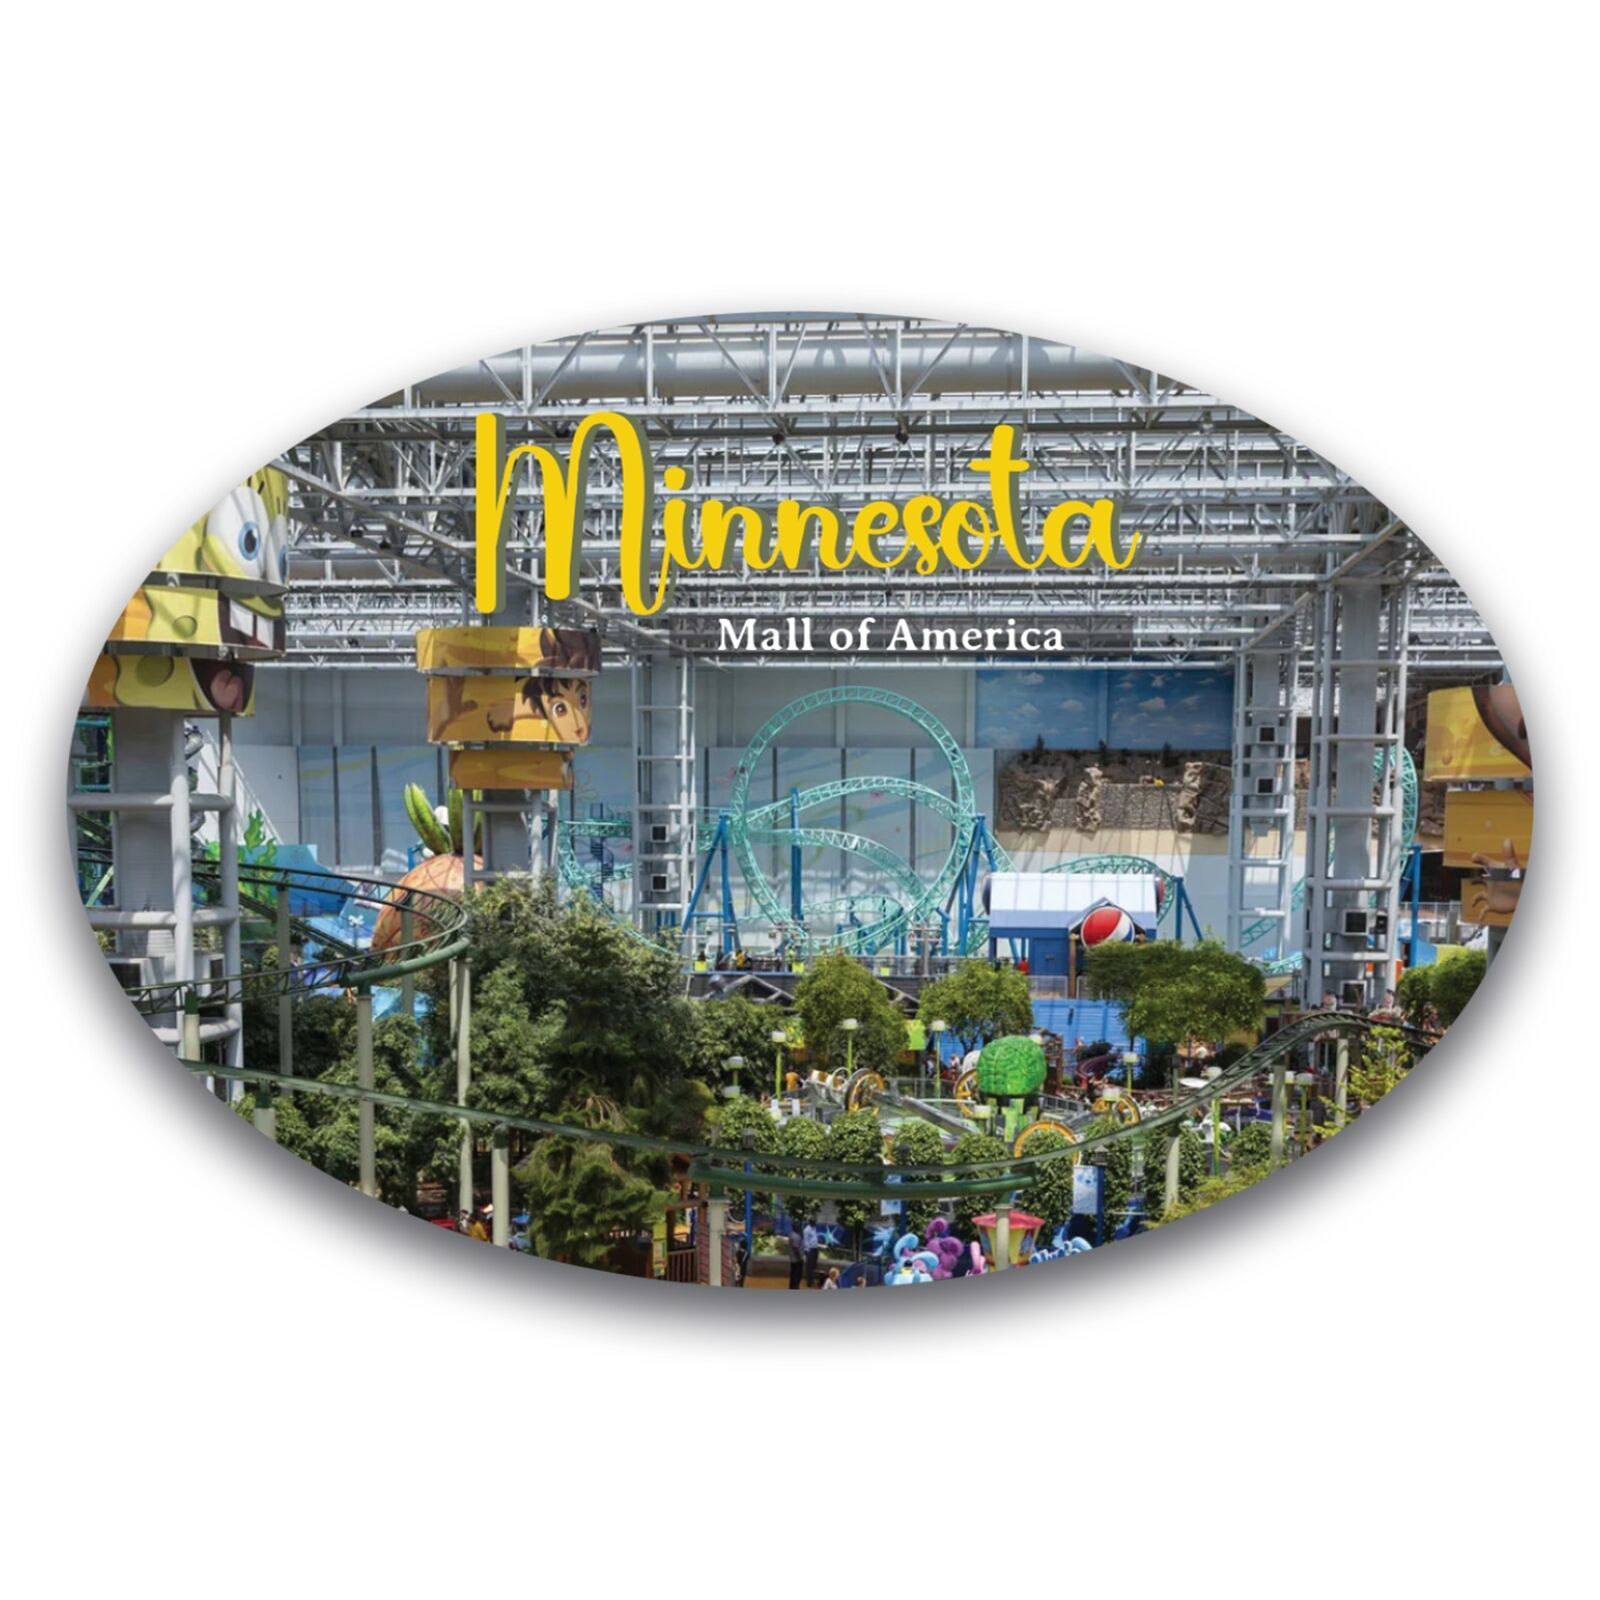 Magnet Me Up Minnesota Mall of America Magnet Decal, 4x6 in,  Automotive Magnet